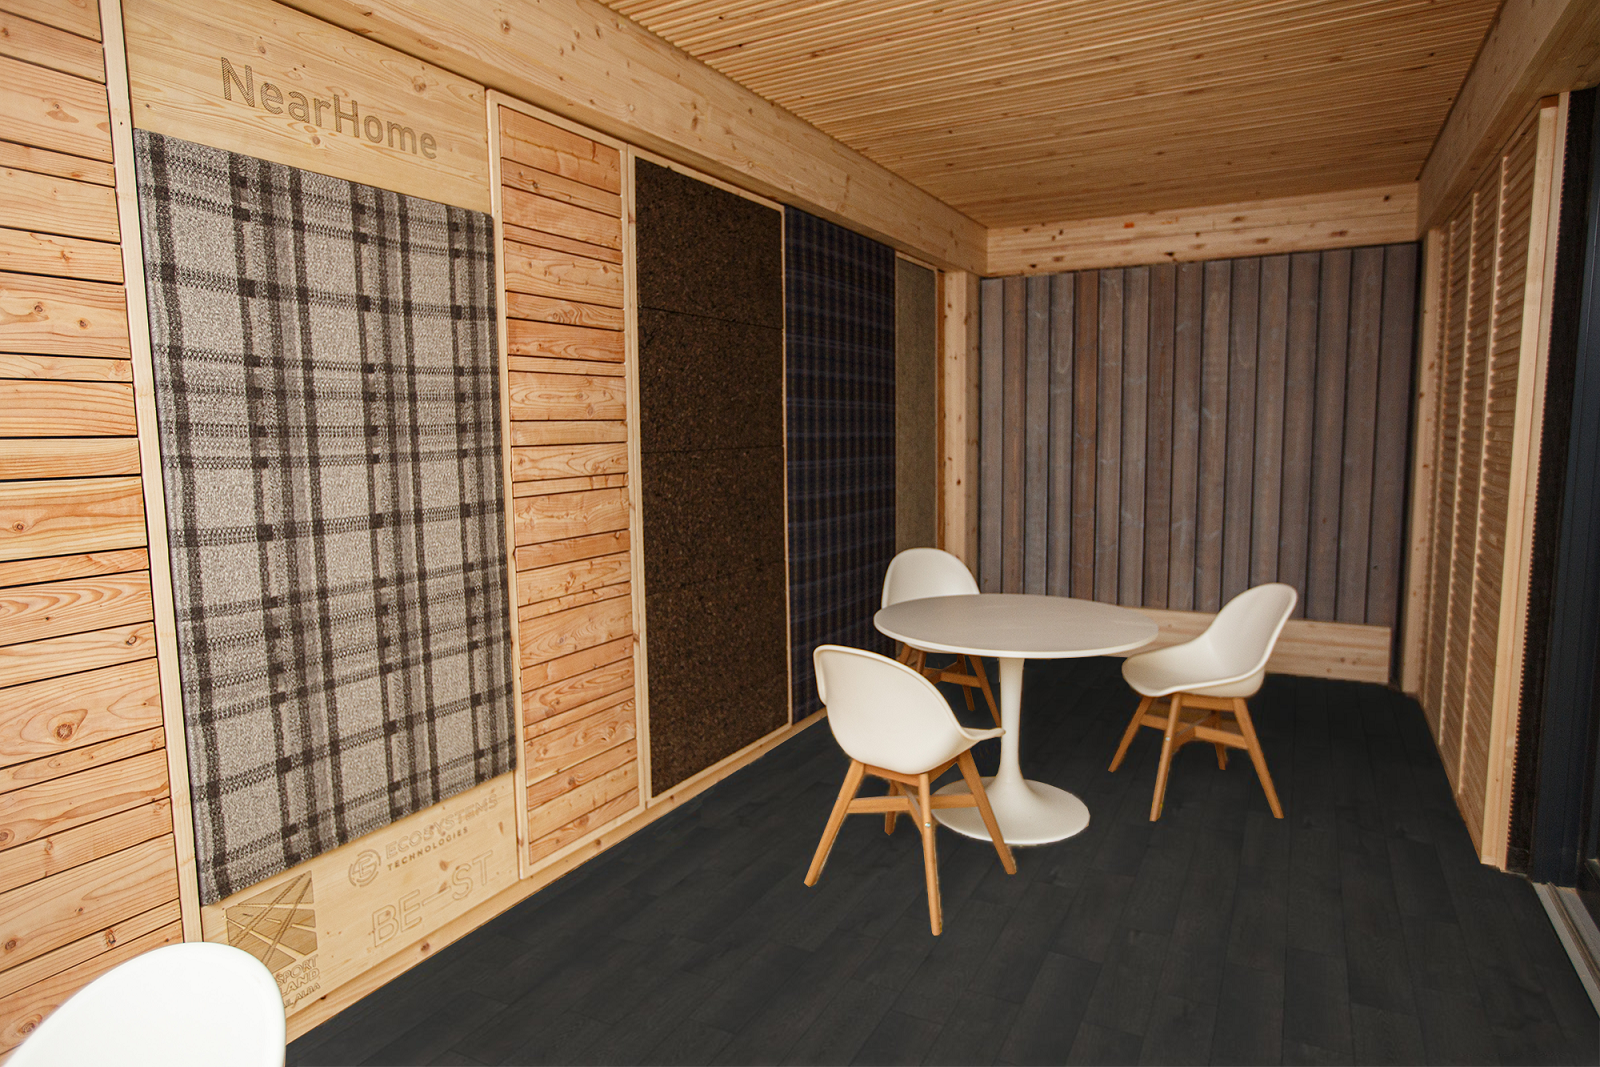 New timber demonstrator unit shows potential for sustainable offices